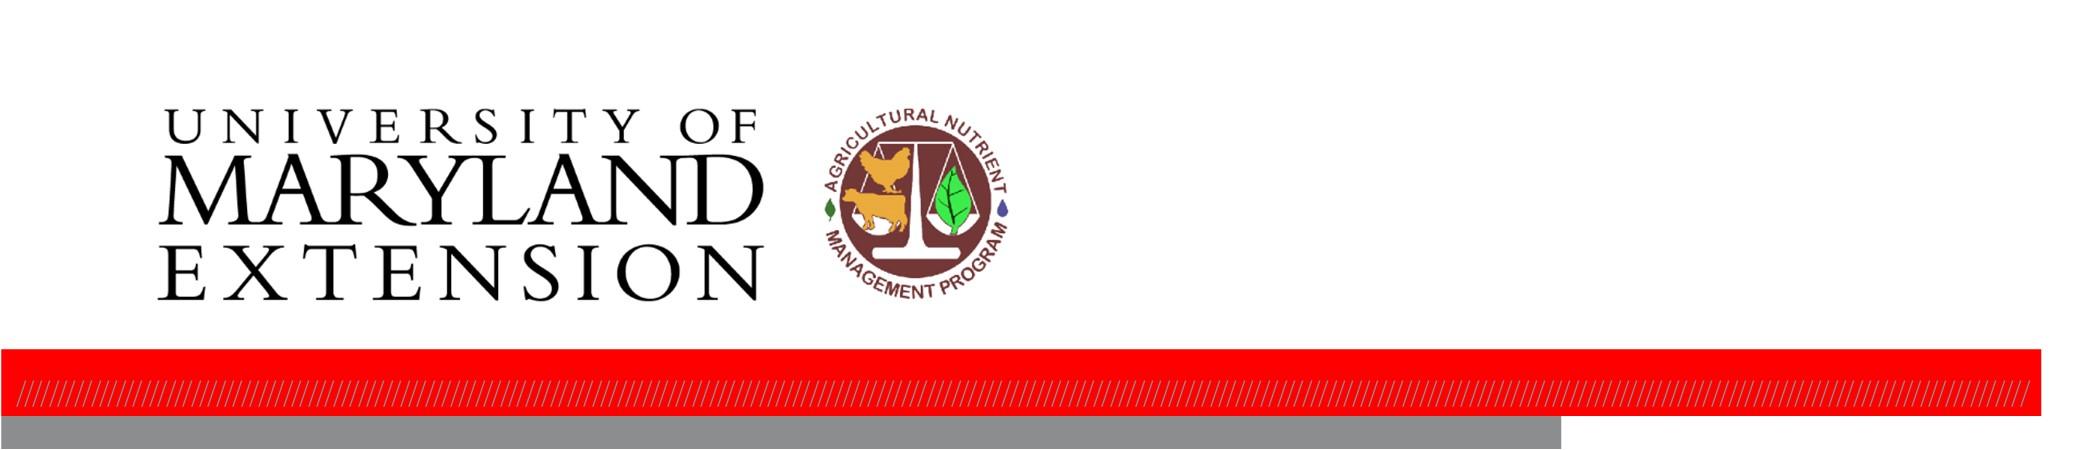 Factsheet header with the University of Maryland Extension and the Agricultural Nutrient Management Program logos